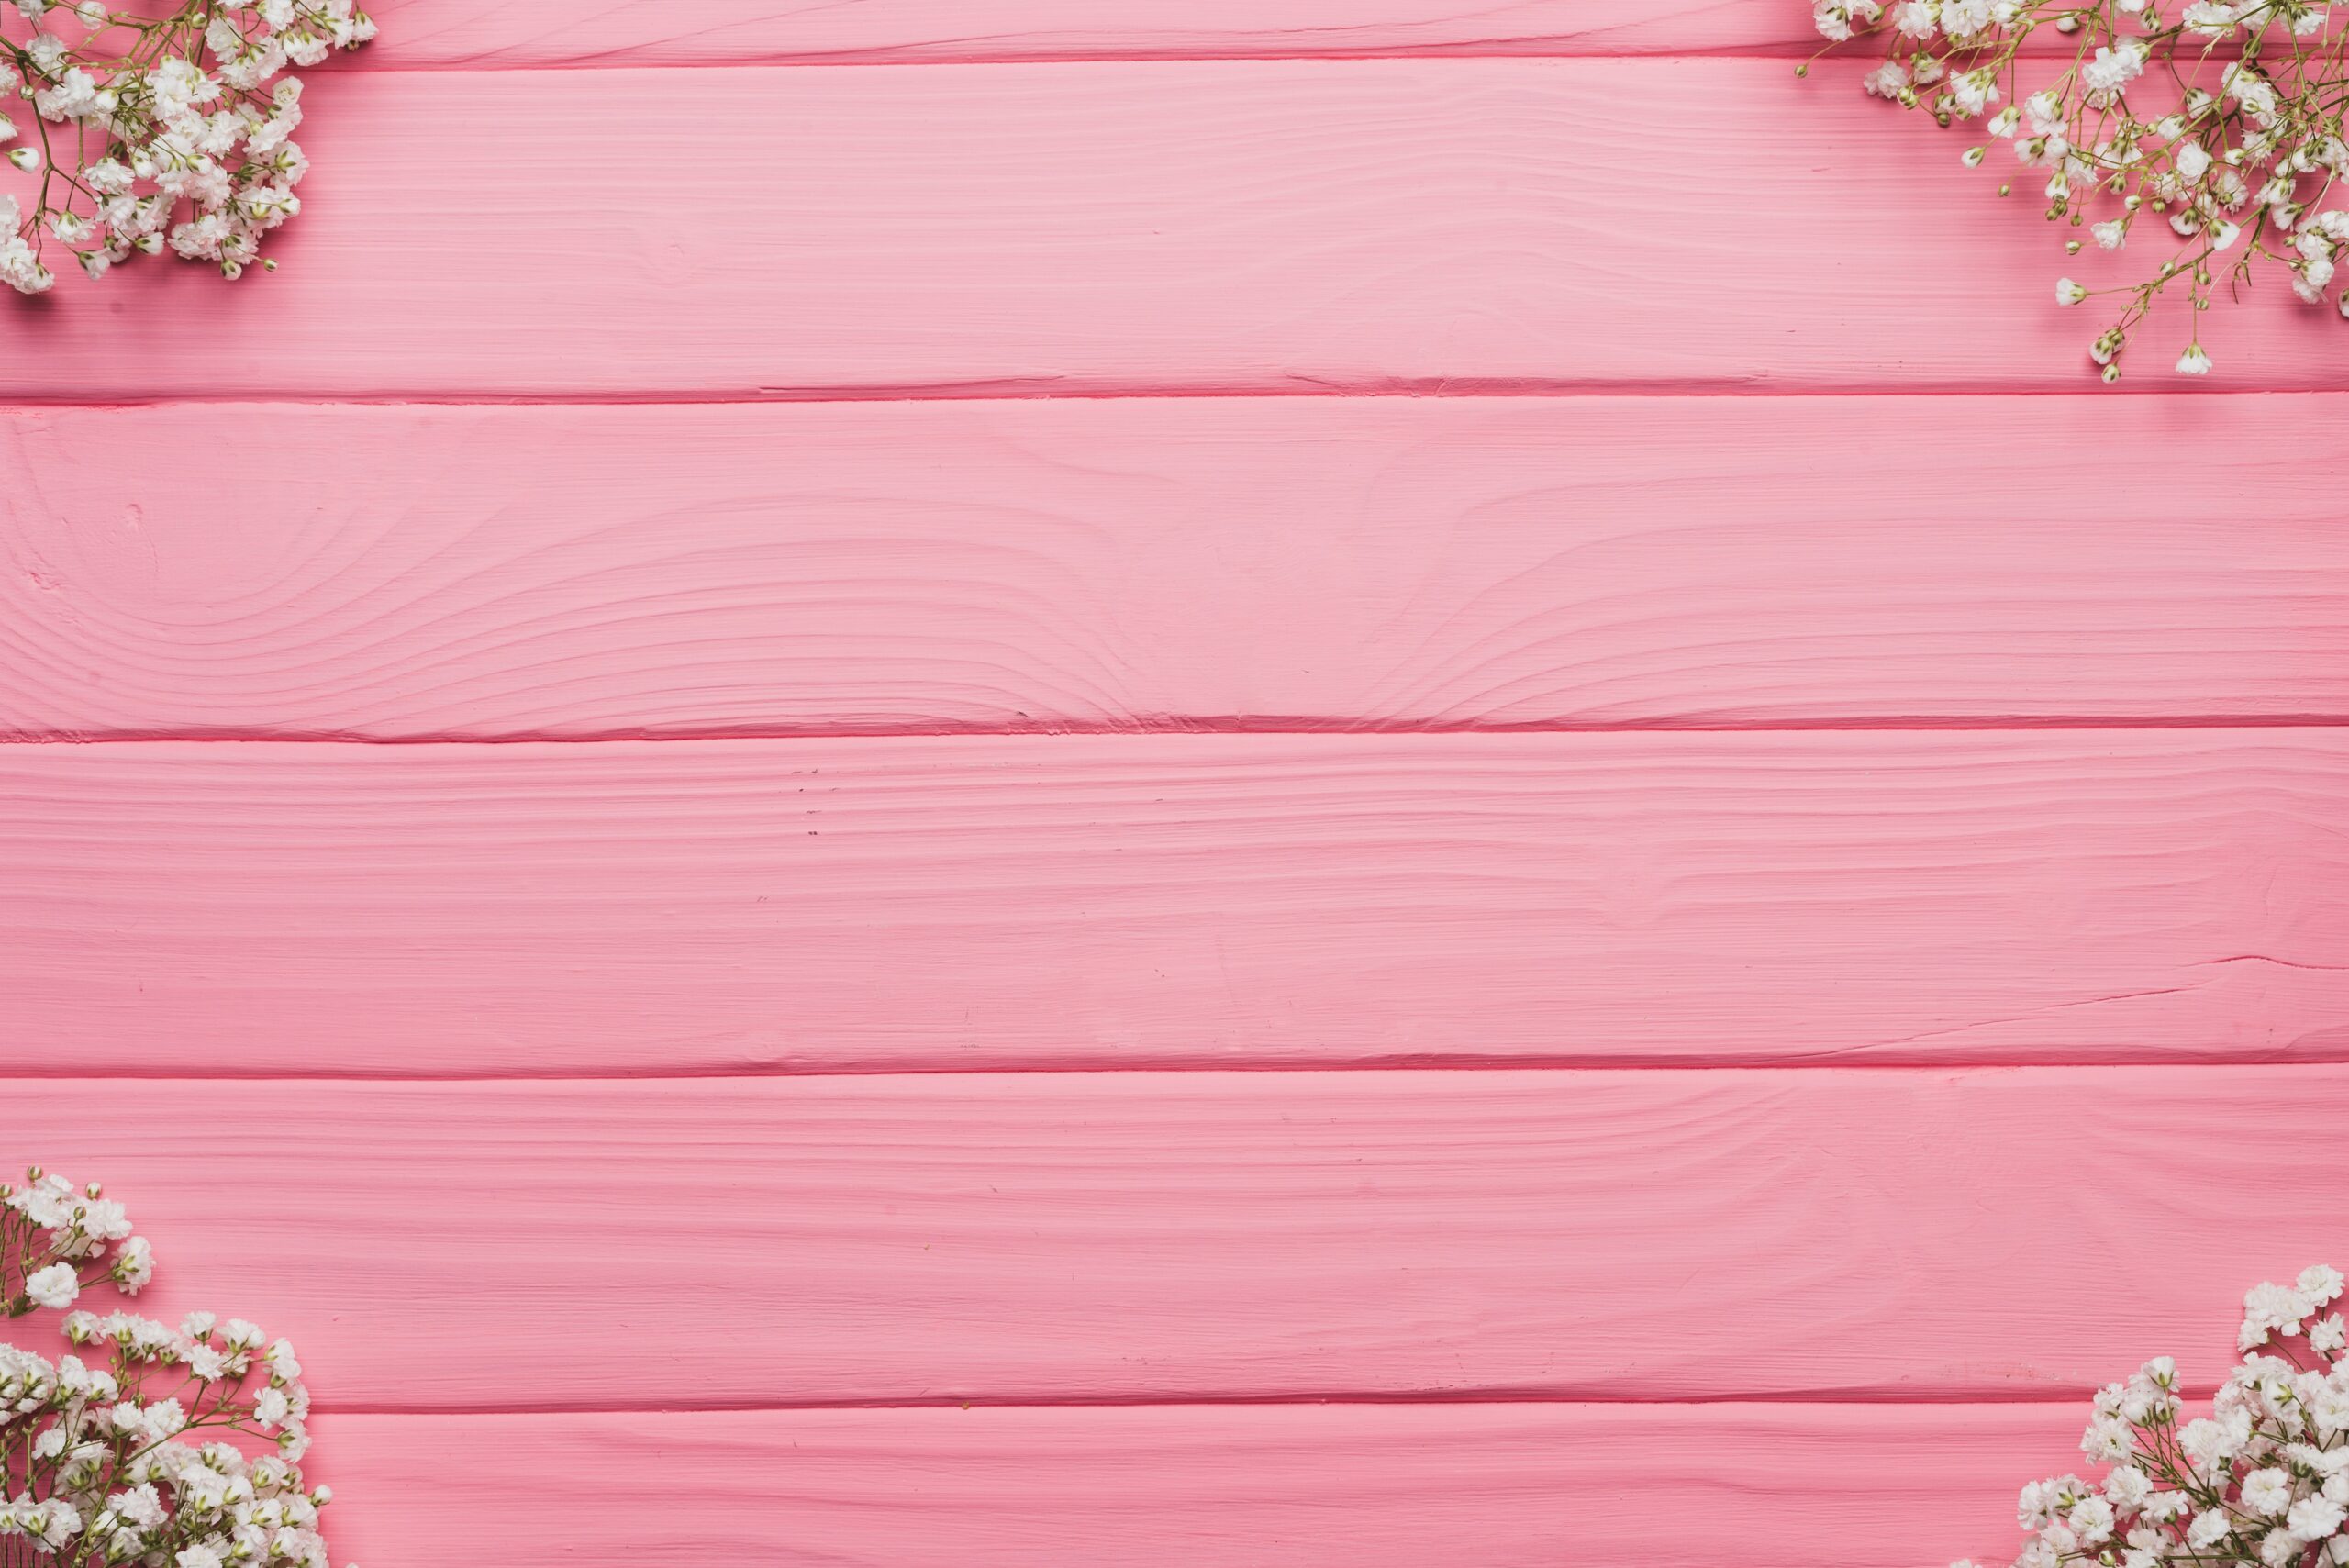 Why Baker-Miller Pink Is the Most Calming Color, According to